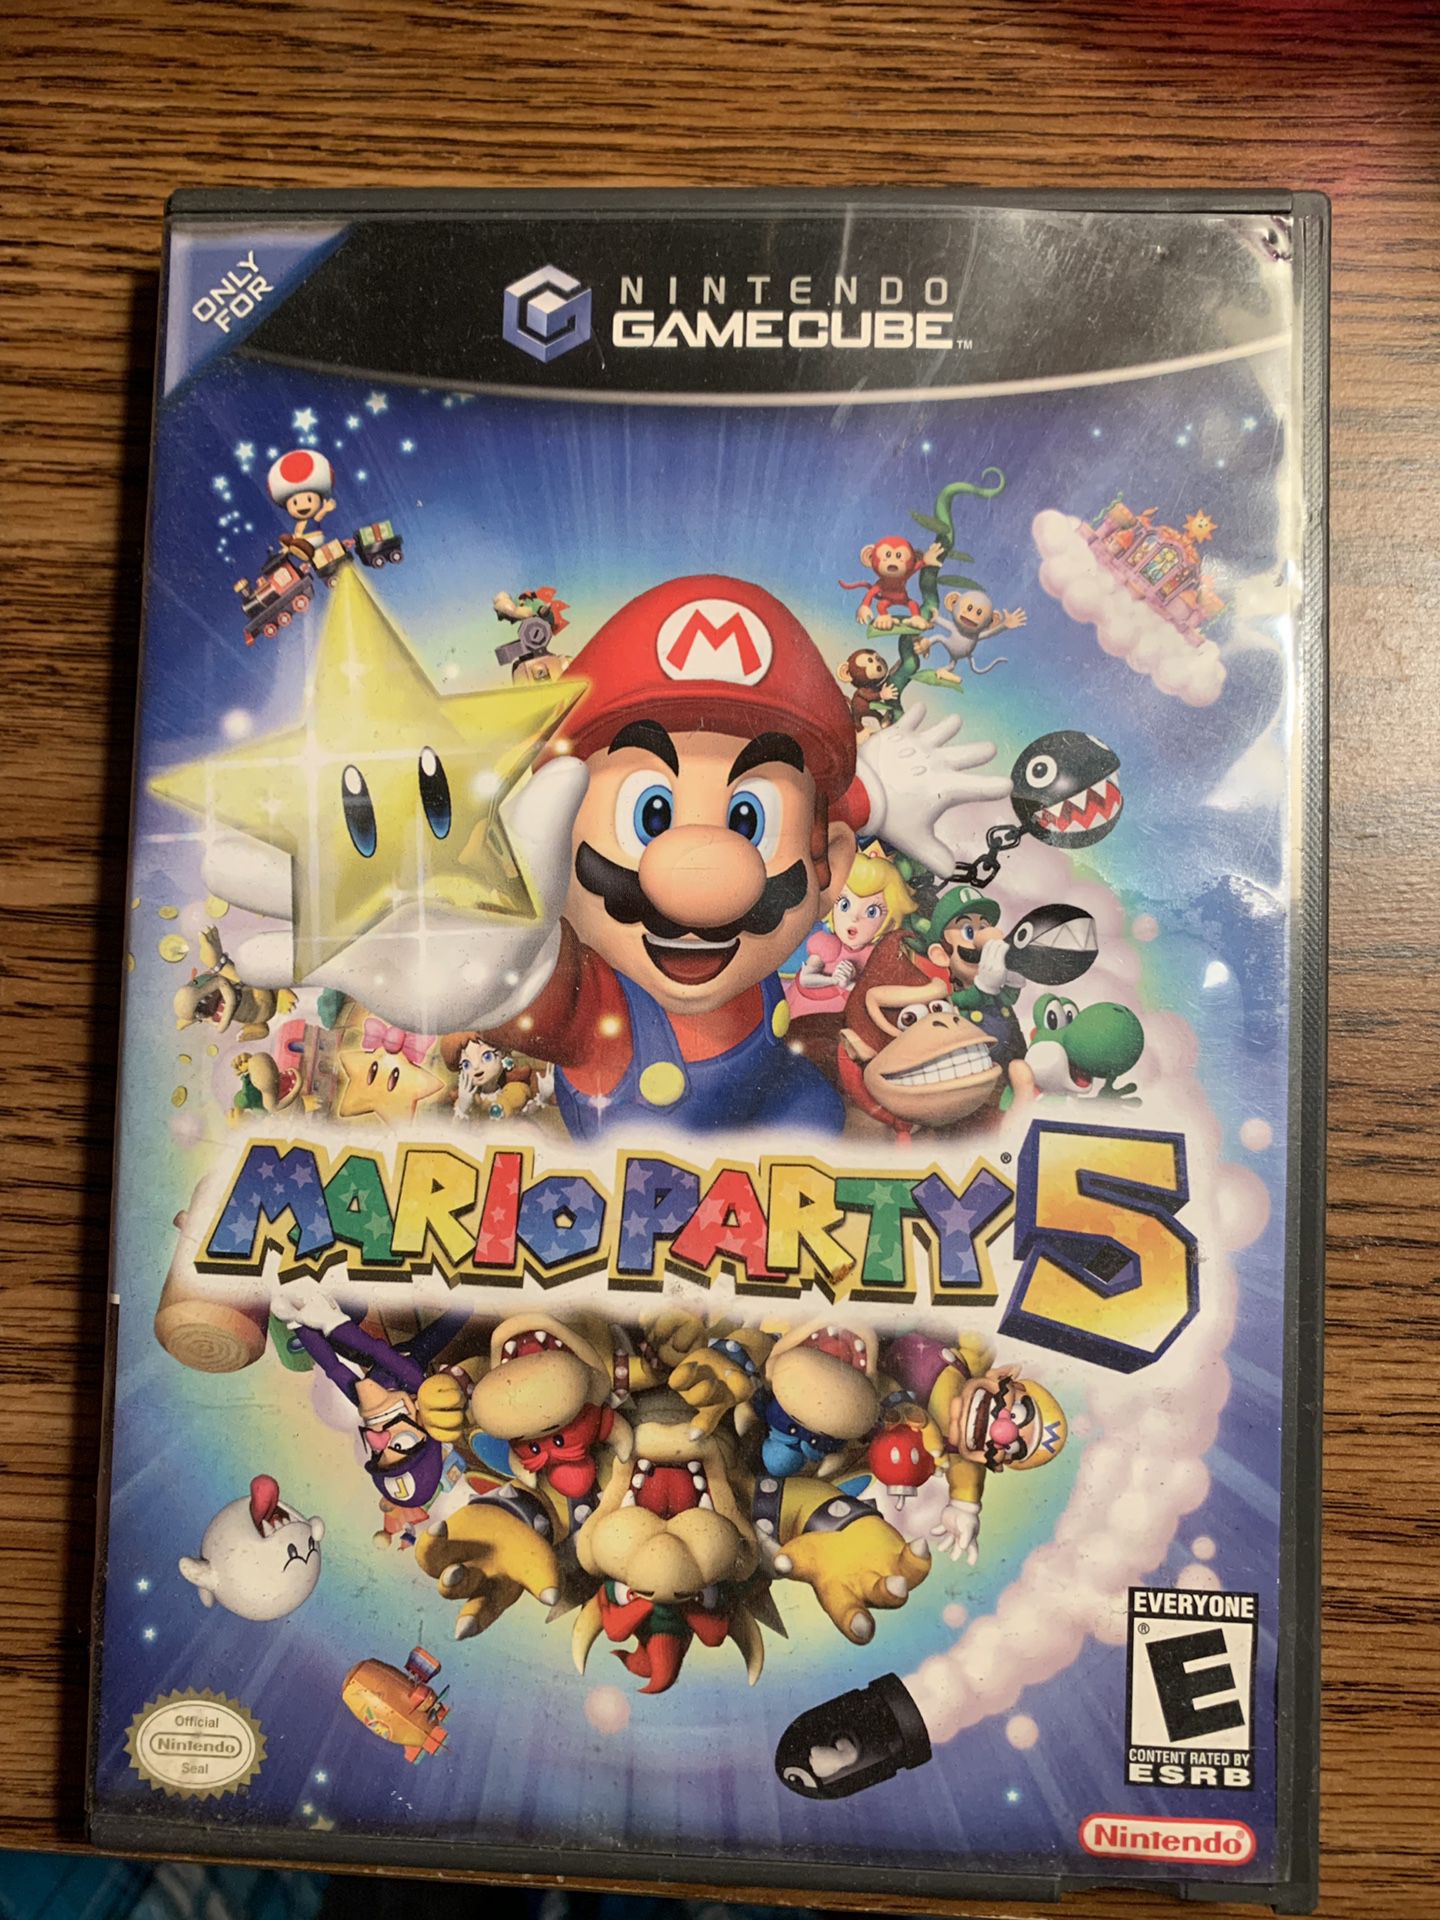 Mario Party 5 for Nintendo GameCube complete game